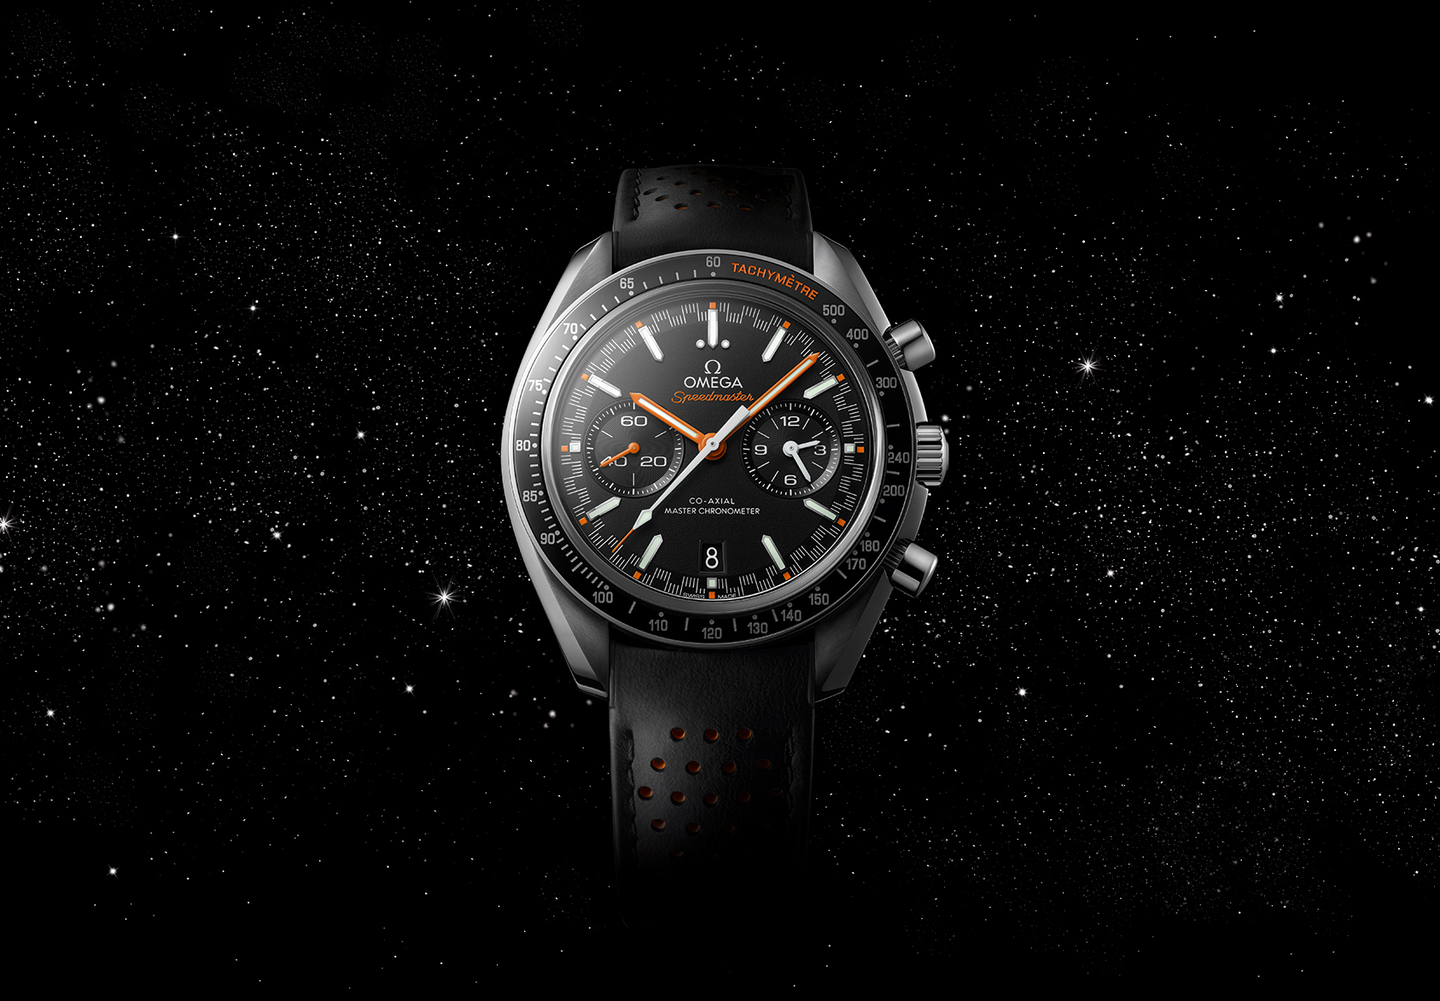 Introducing the Omega Speedmaster Automatic with Master Chronometer certification